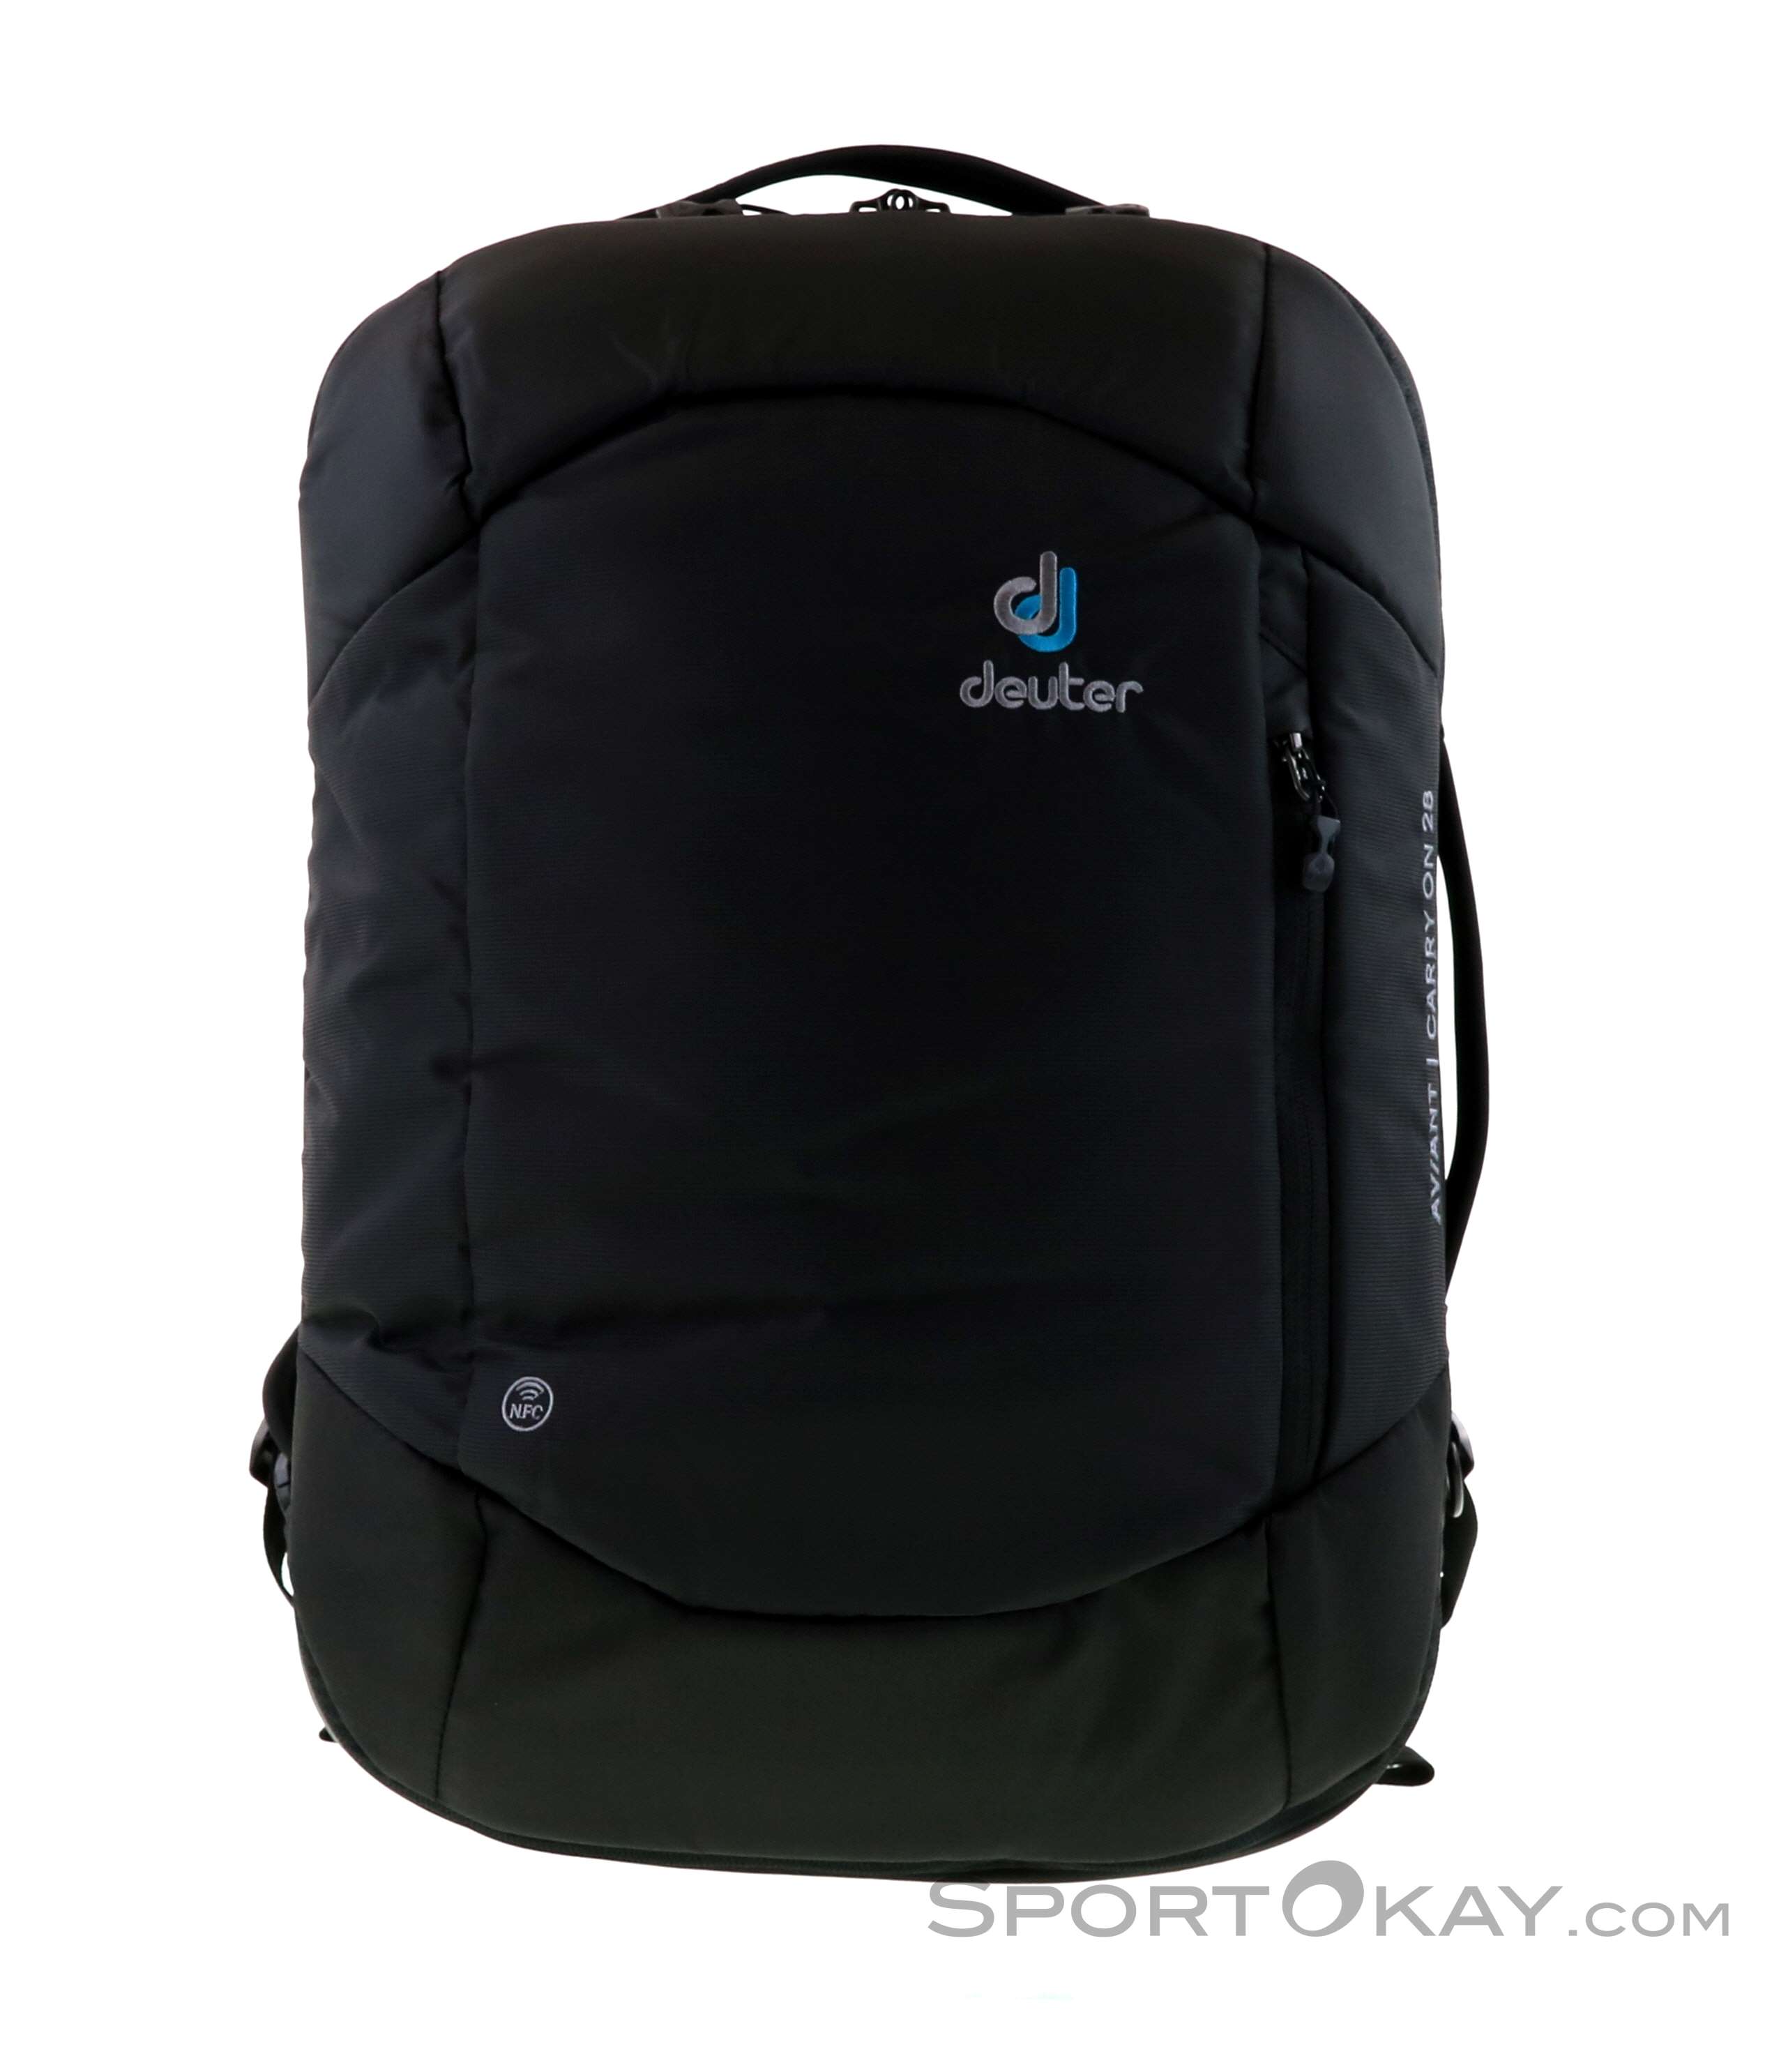 Deuter Aviant Carry On 28l Backpack - Bags - Leisure Bags